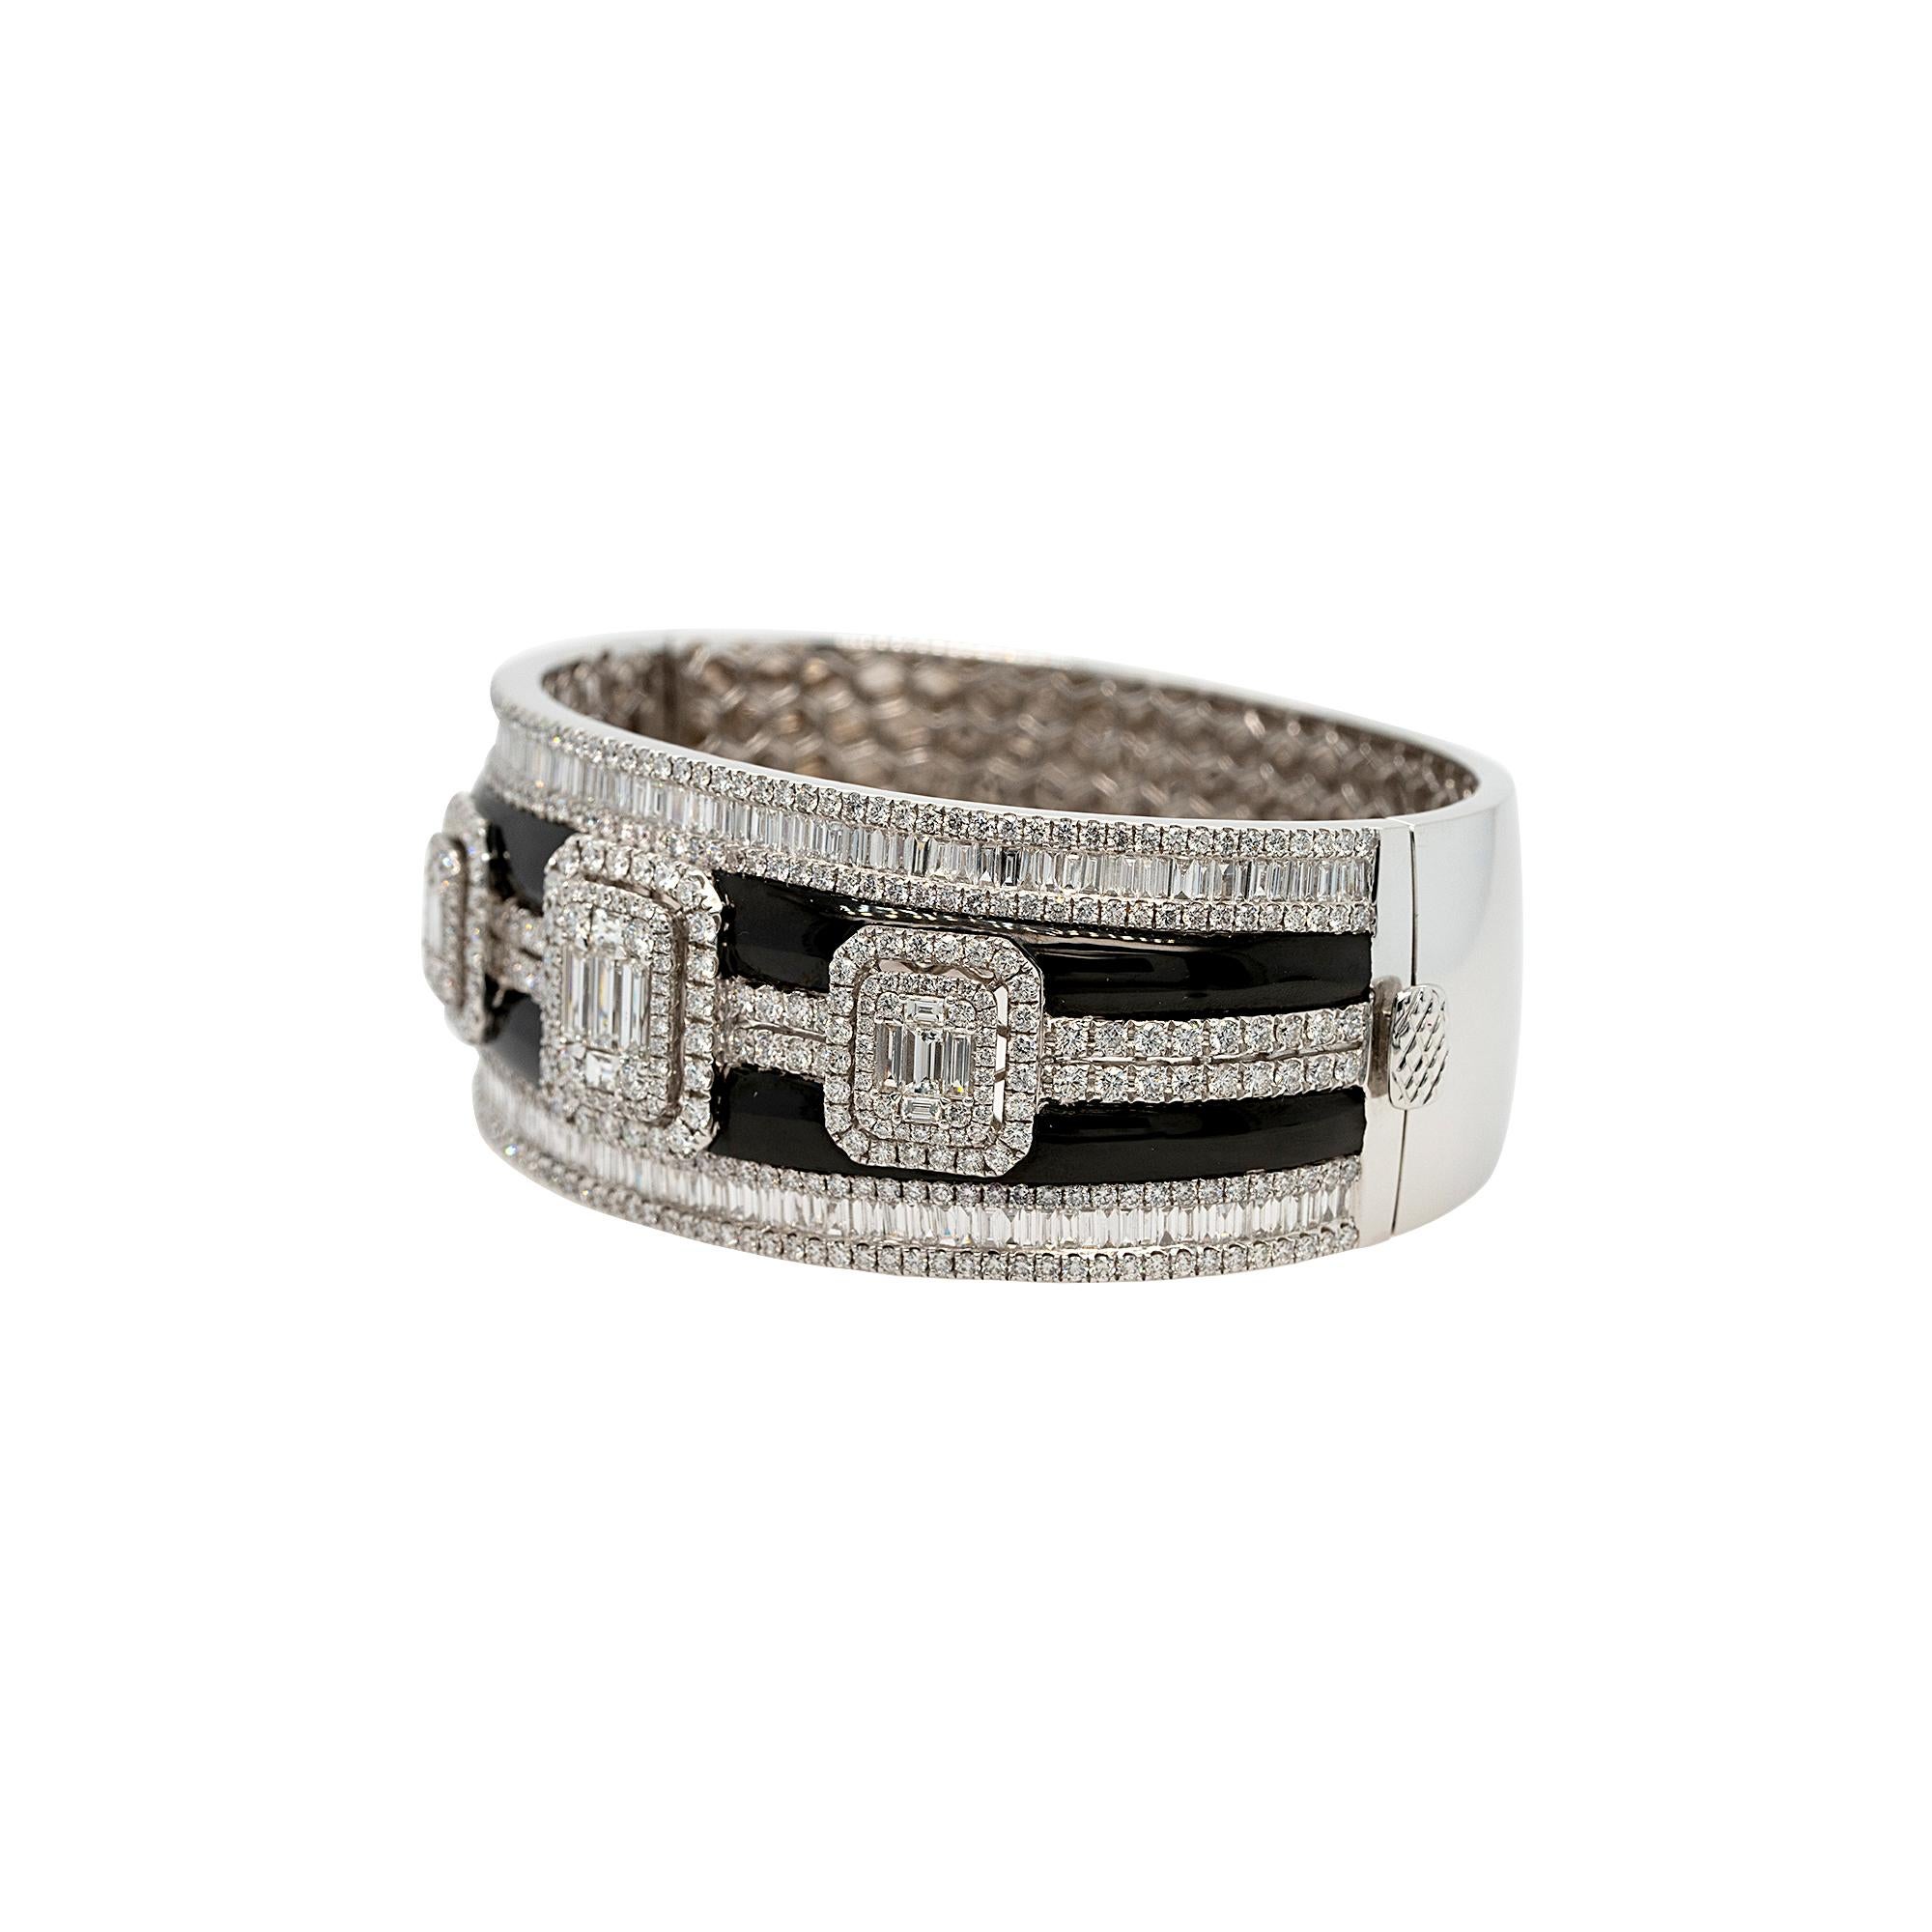 Material:
18k White Gold
Black Enamel
Diamond Details:
5.41ct Round Brilliant Natural Diamond
4.05ct Baguette Cut Natural Diamond
G color VS Clarity
Measurements: 
Size 6
26.5mm x 7.2mm
Total Weight: 65.8g (42.3dwt)
This item comes with a